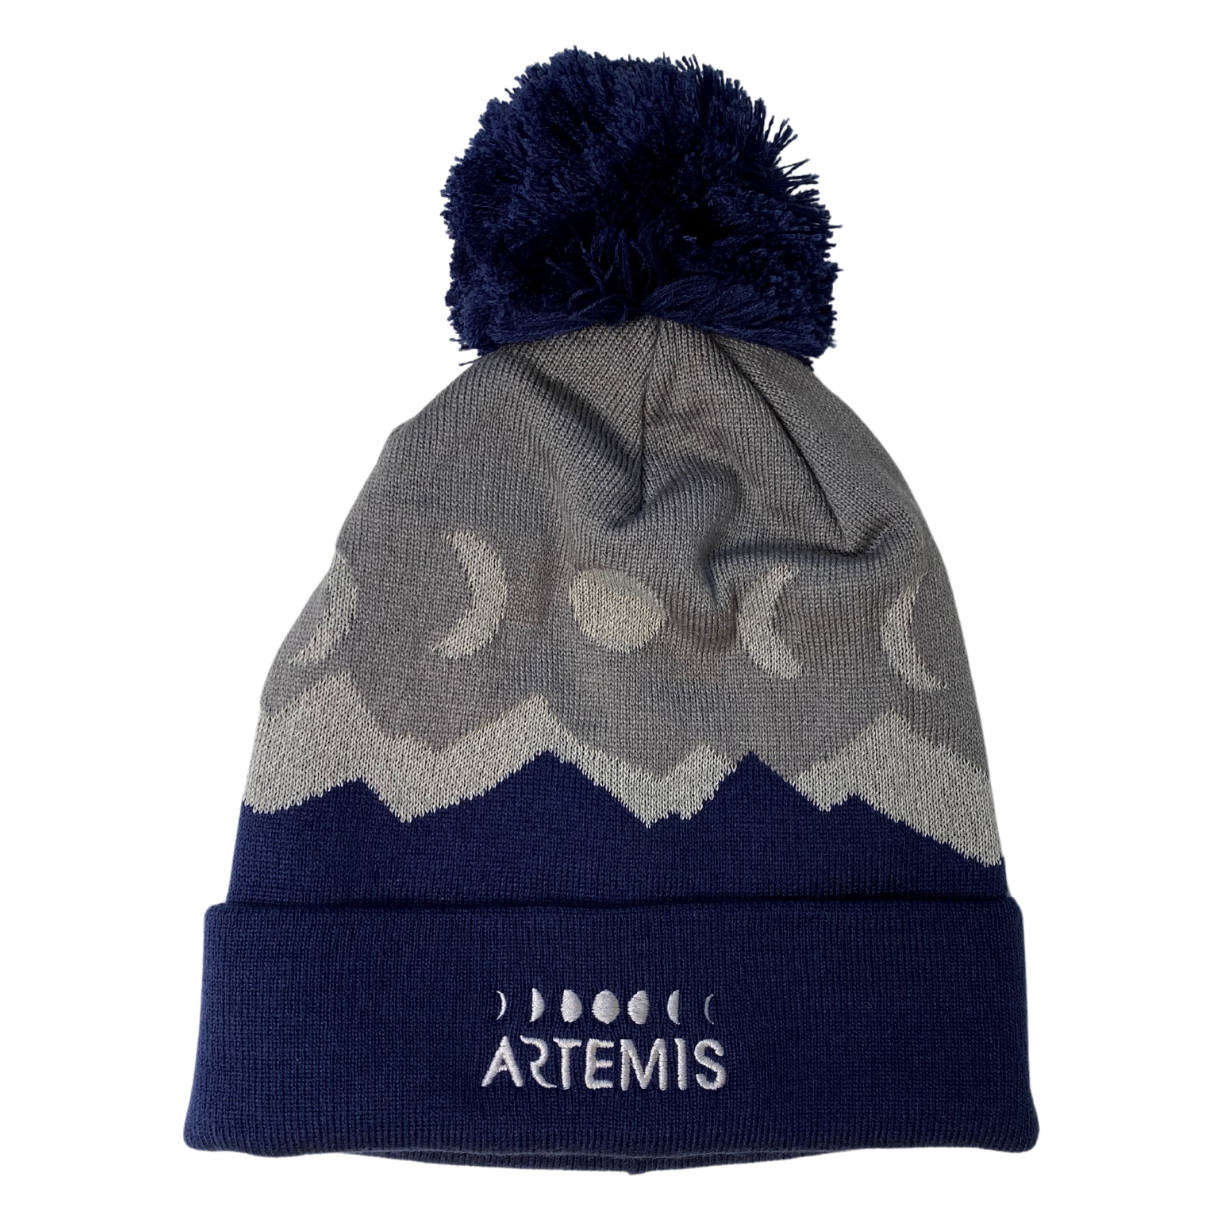 Artemis Moon Phases Beanie With Pom 24197